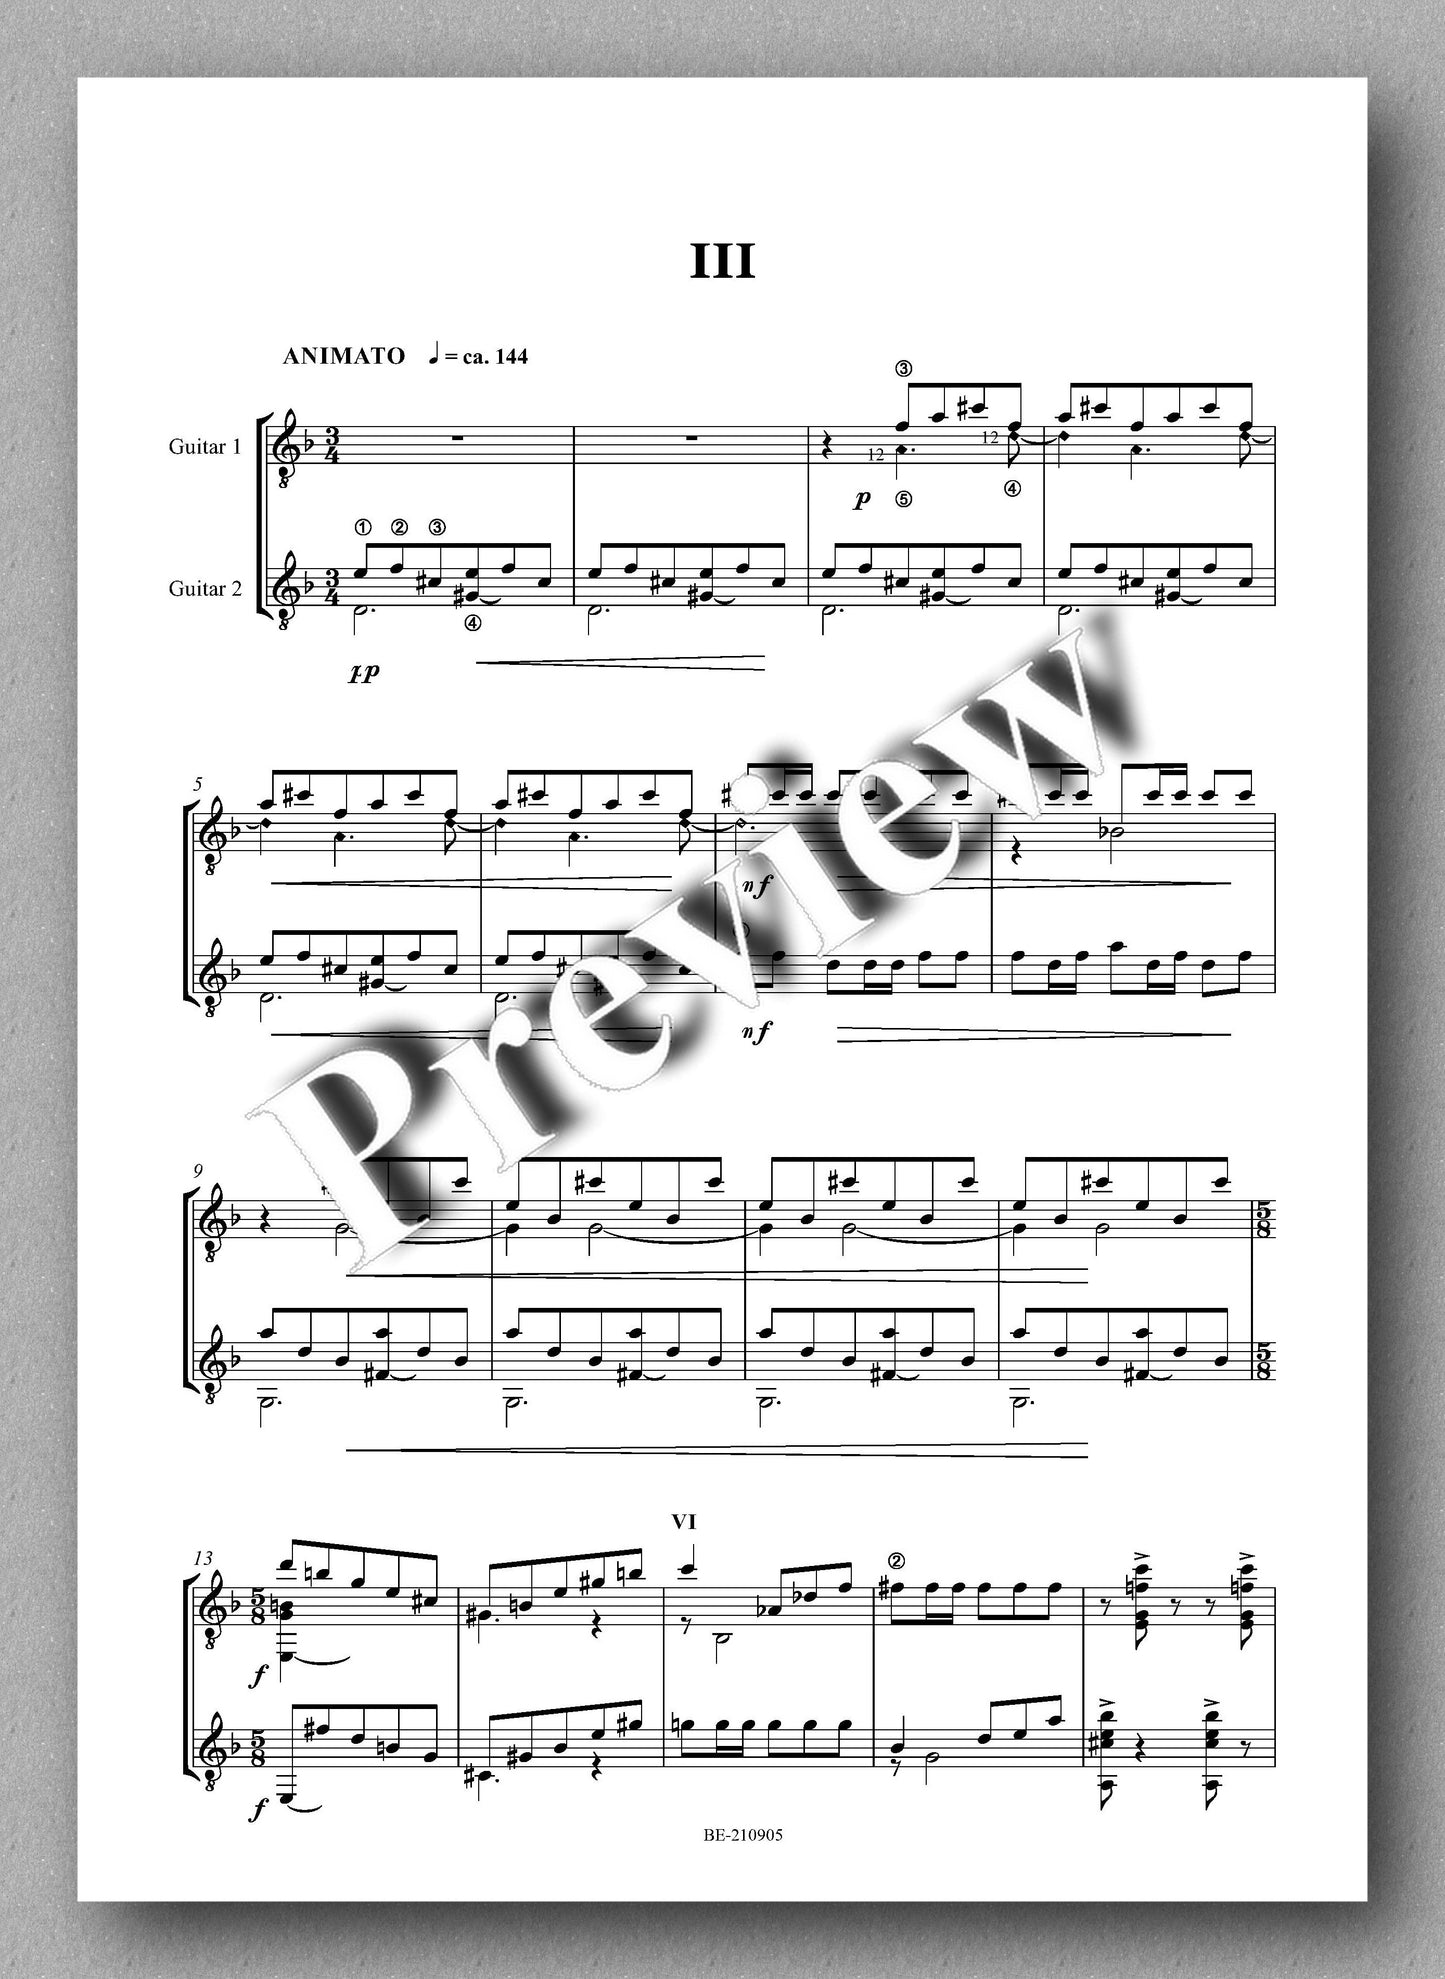 Østen Mikal Ore,  A Touch of Jazz - preview of the music score 3